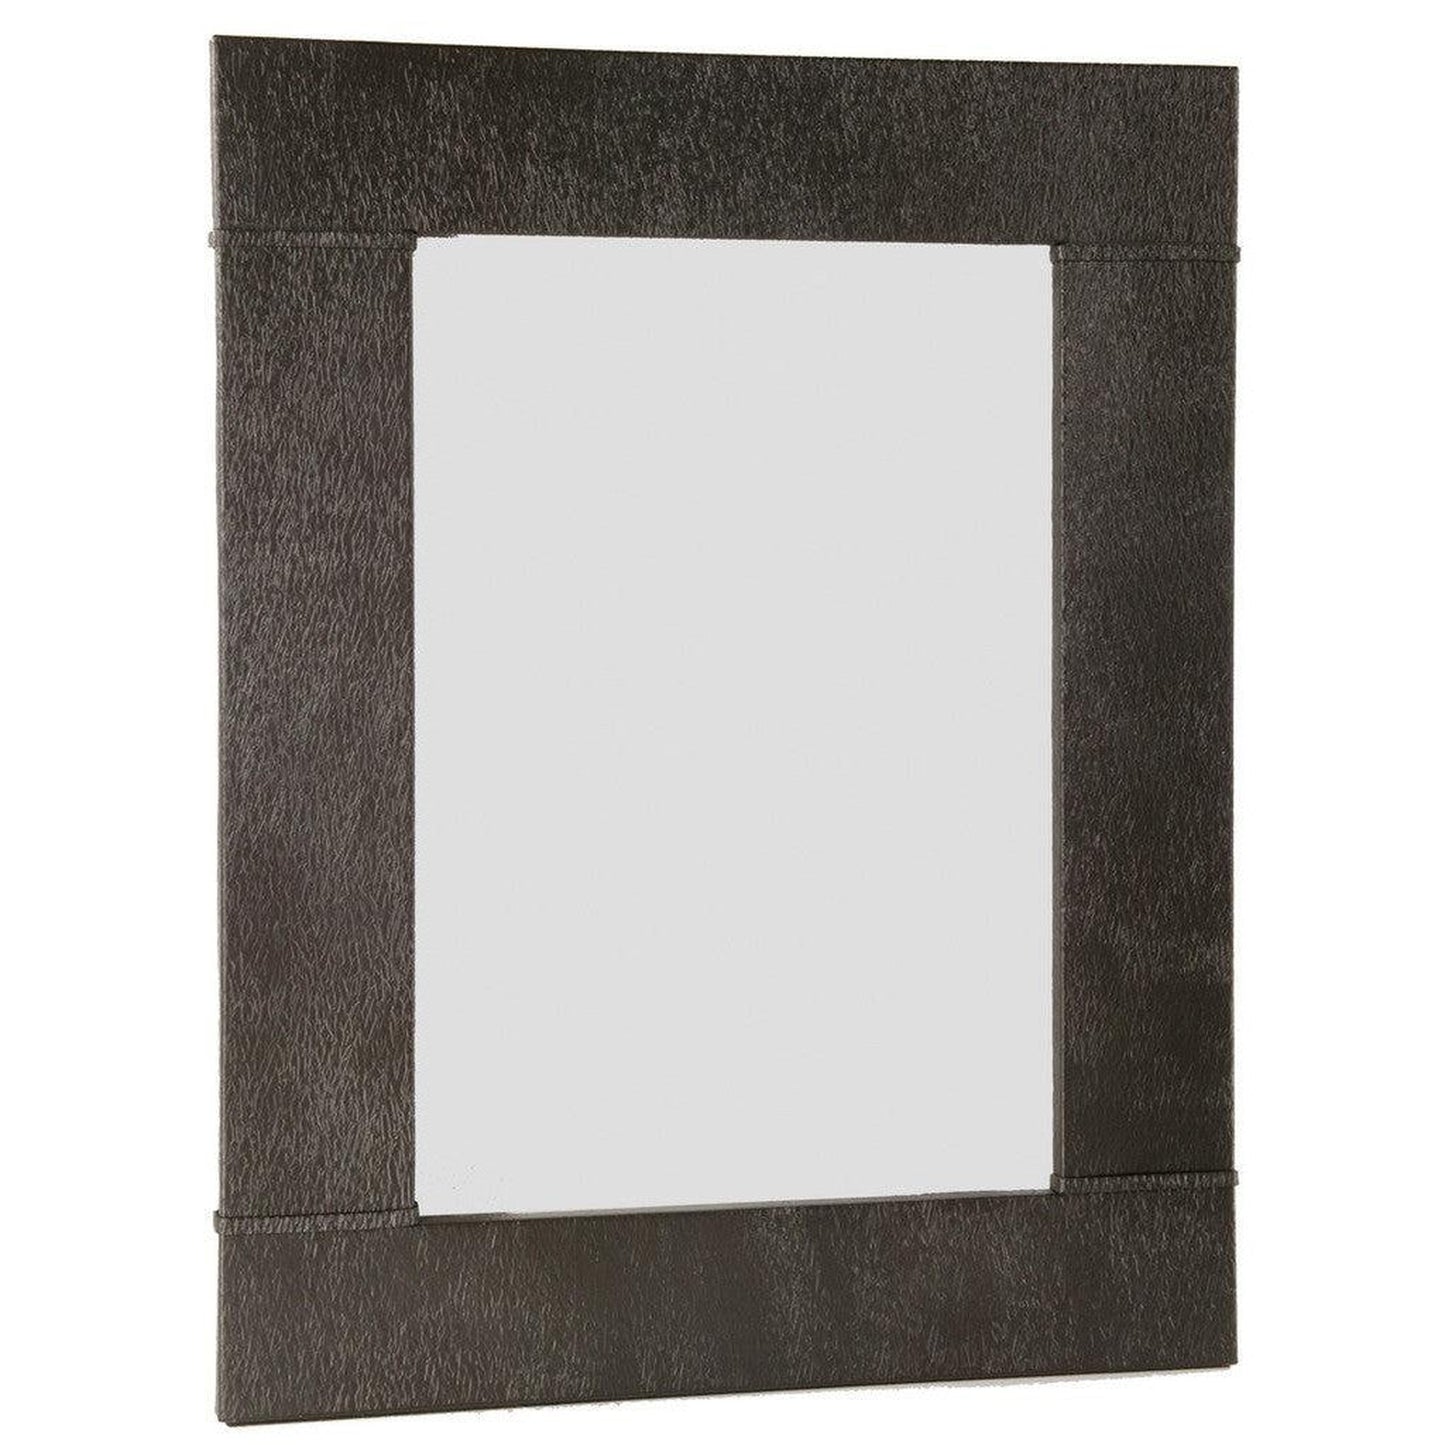 Stone County Ironworks Cedarvale 37" x 45" Large Hand Rubbed Ivory Iron Wall Mirror With Pewter Iron Accent